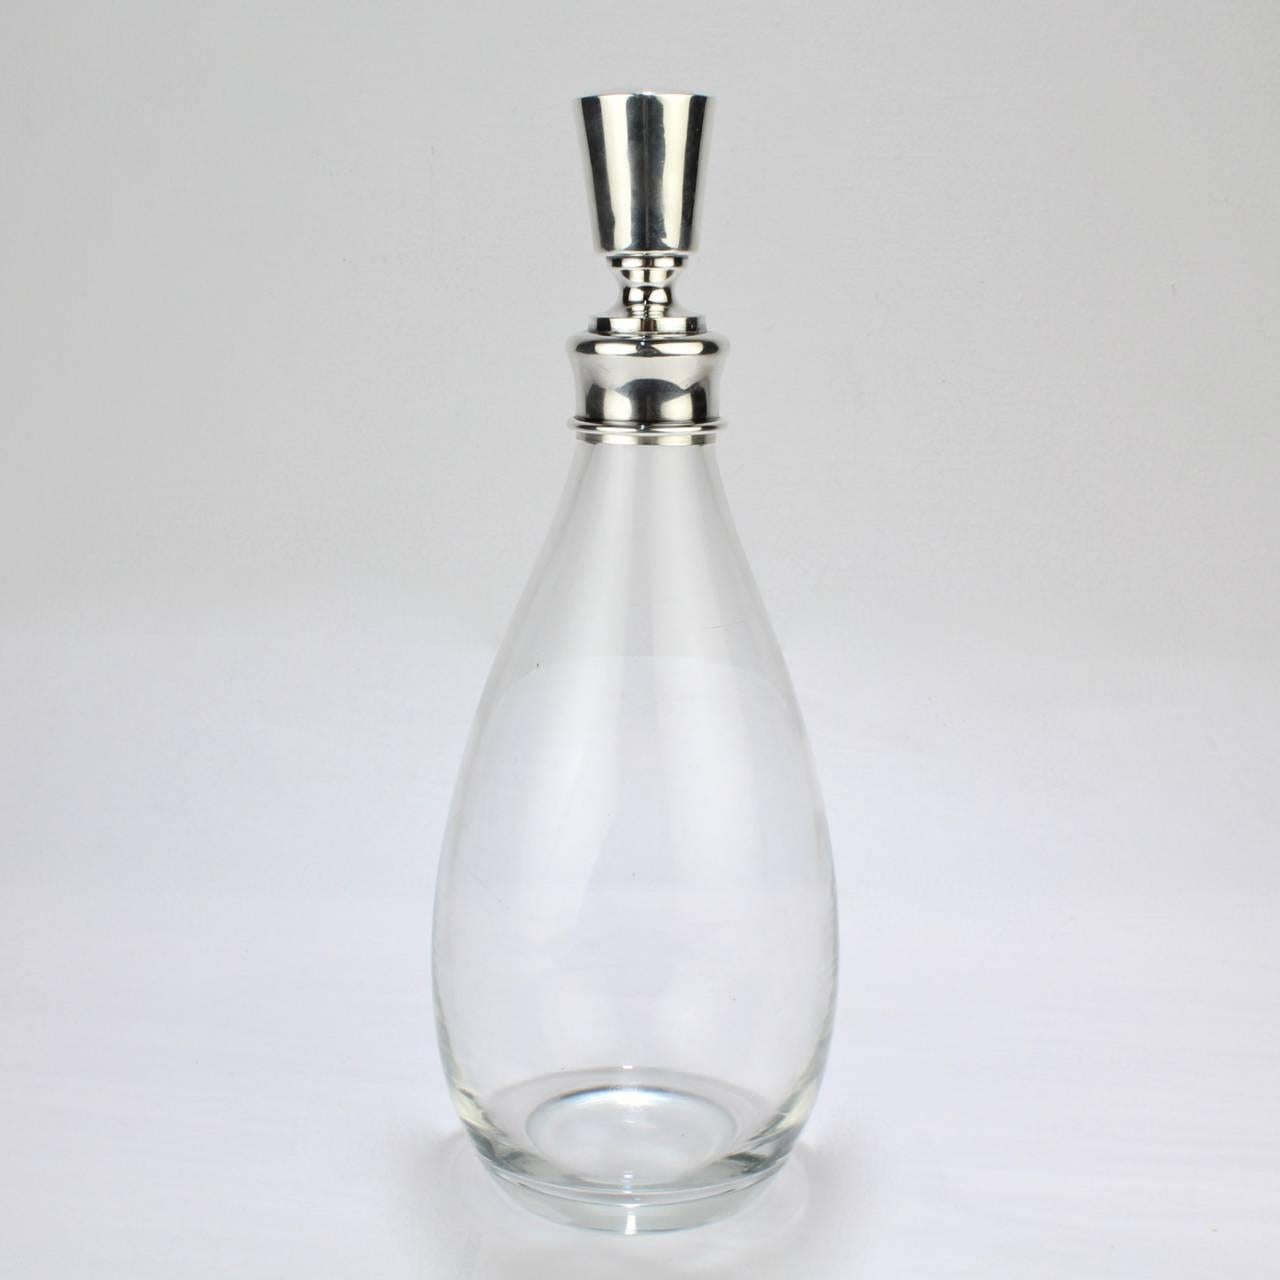 A fine, modernist Hawkes glass and sterling silver mounted decanter or bar bottle.

Stamped Hawkes and Sterling to top and Sterling to bottle's mount. The base bears an acid etched Hawkes factory mark.

Height (inclining top): circa 11